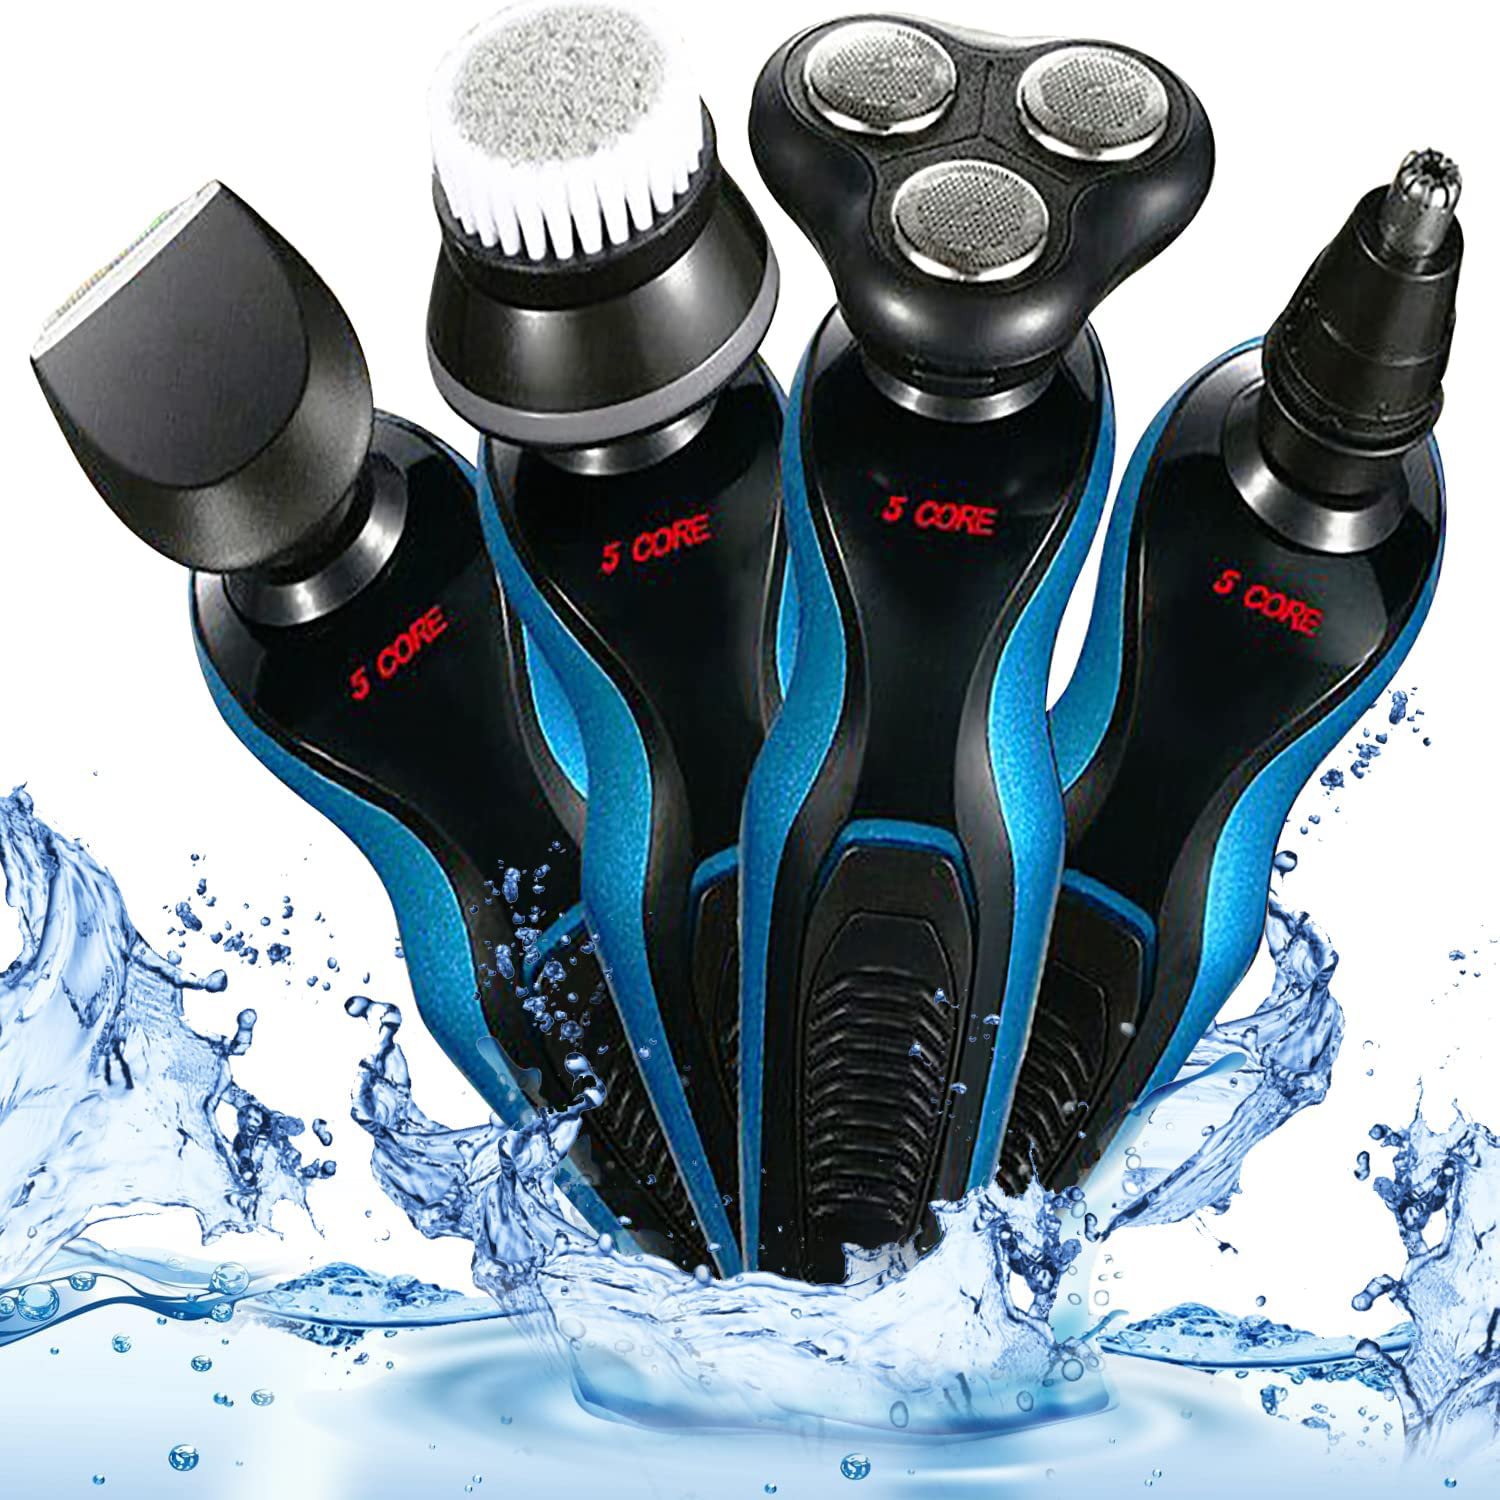 4-in-1 Electric Razor for Men Cordless Wet & Dry USB Rechargeable Rotary Waterproof Beard Trimmer